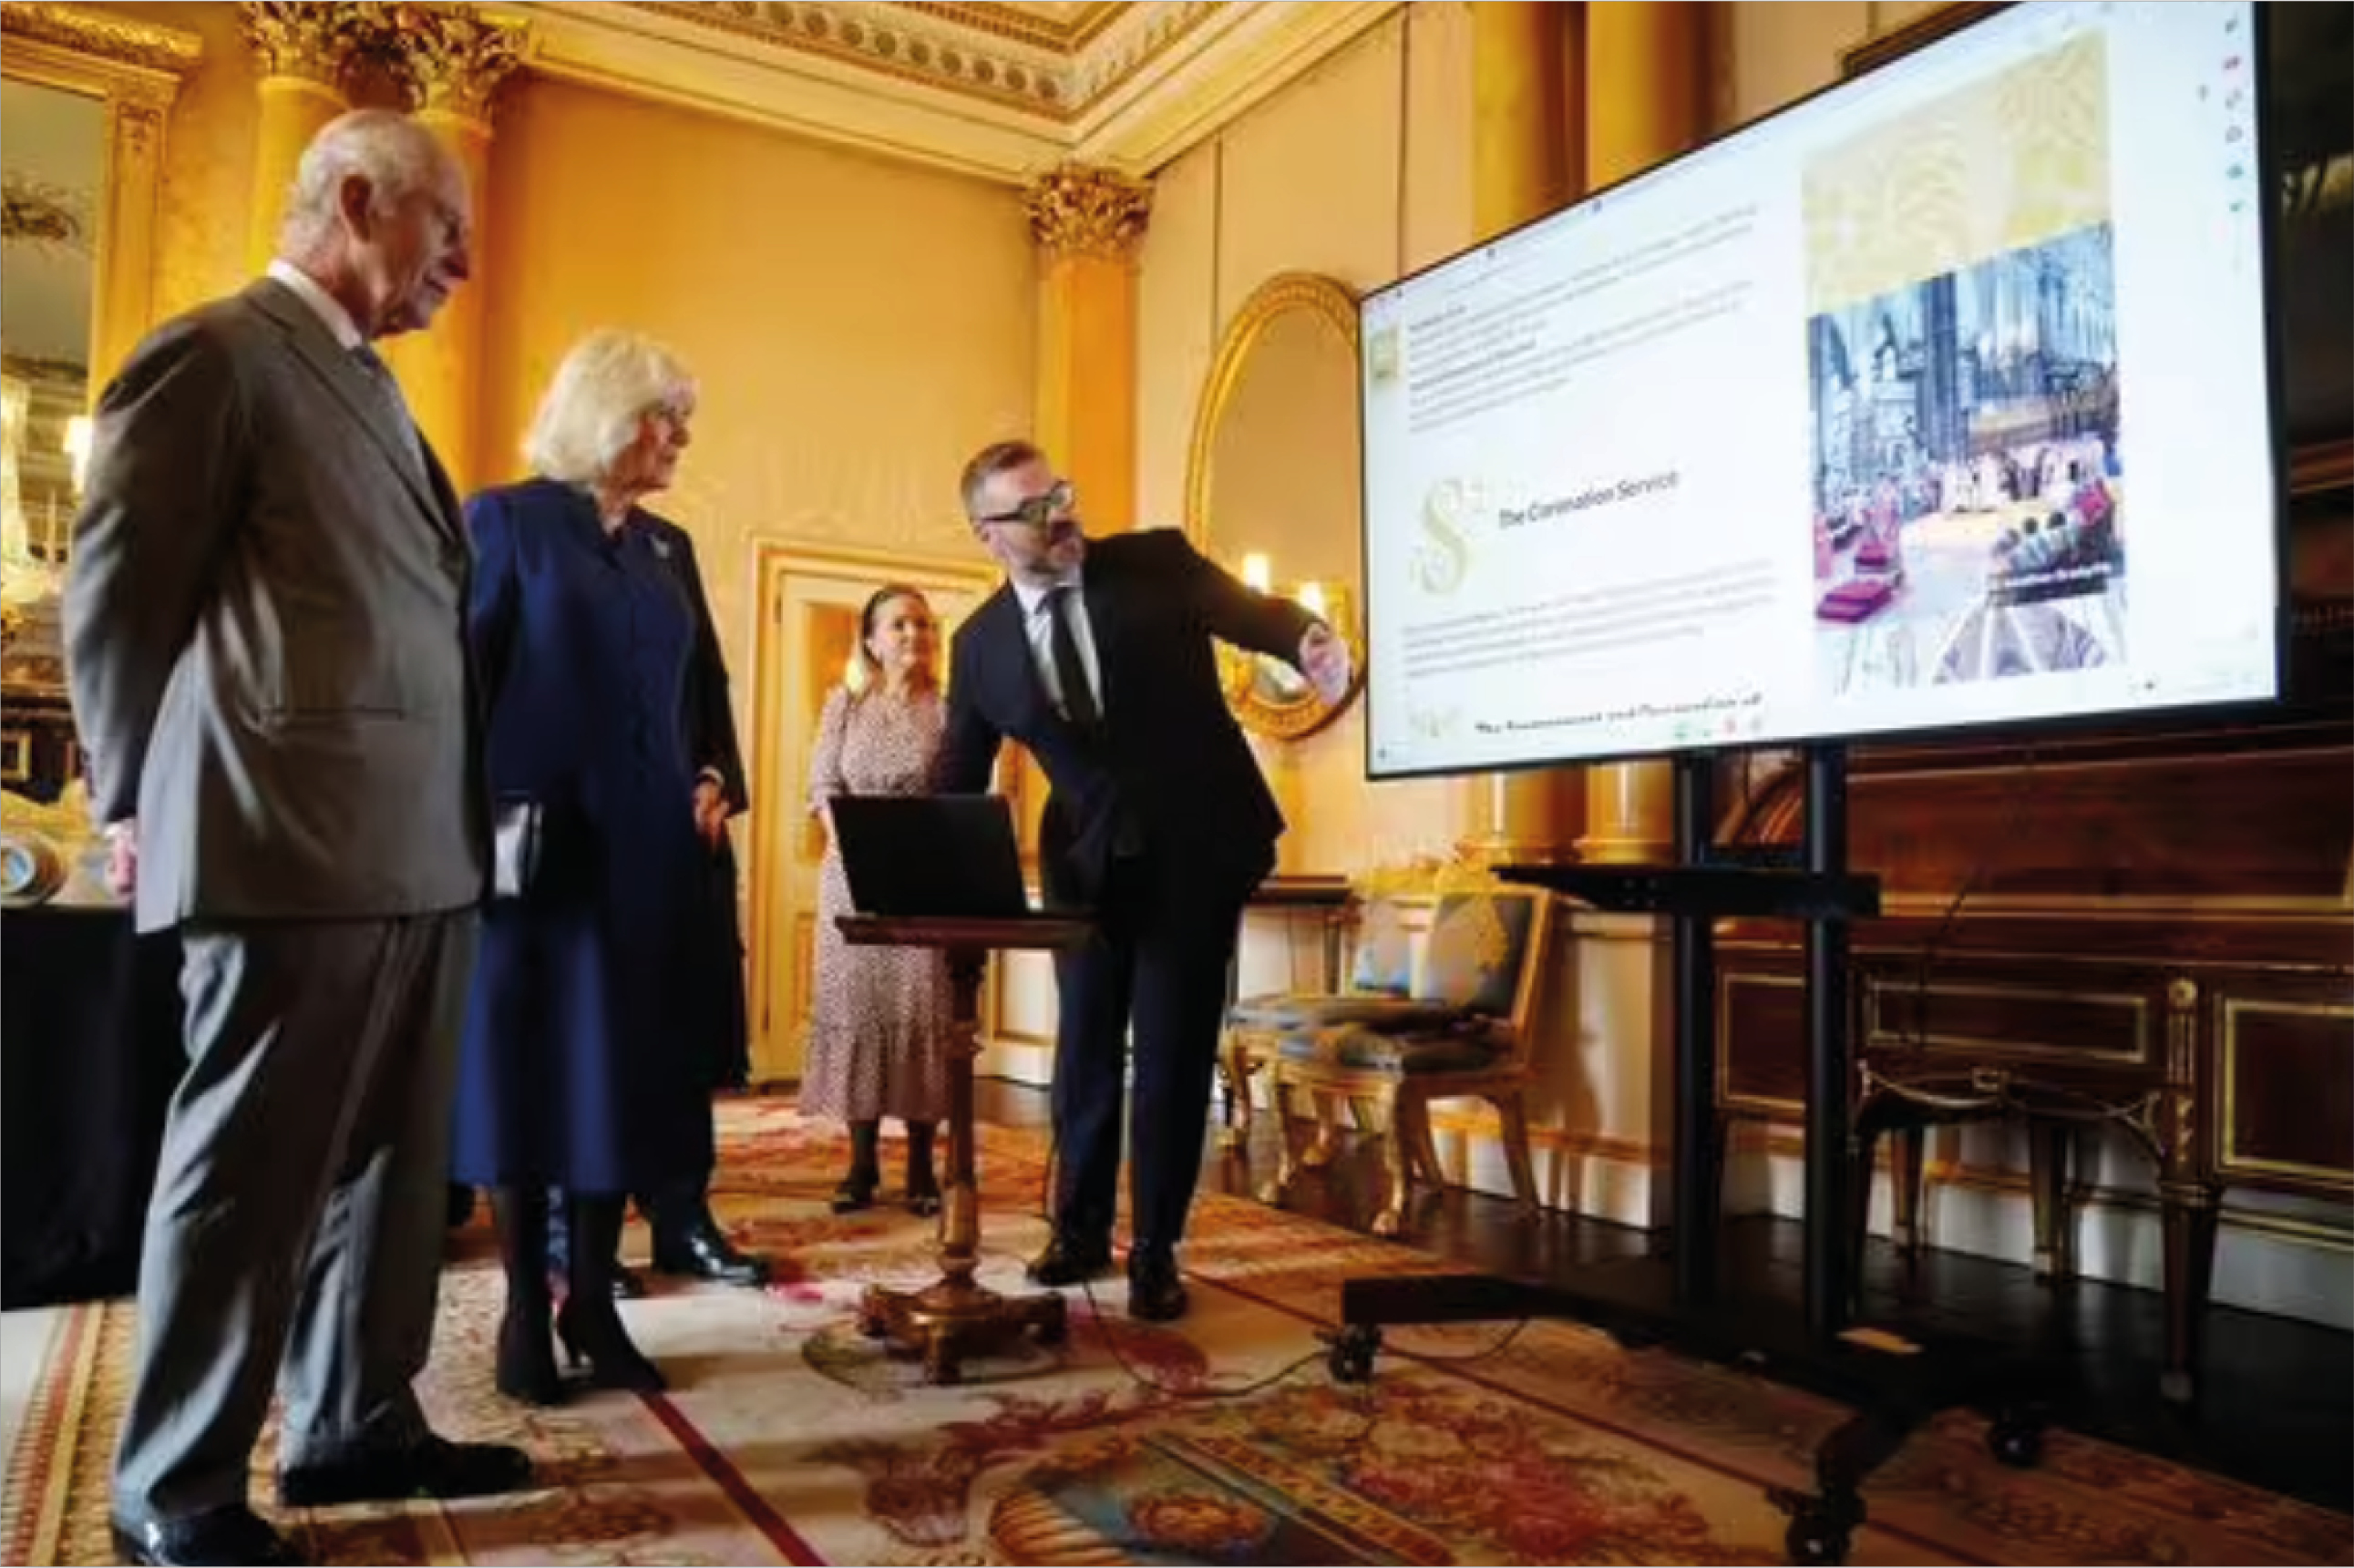 A presentation displaying the new Coronation roll website to King Charles III and Queen Camila